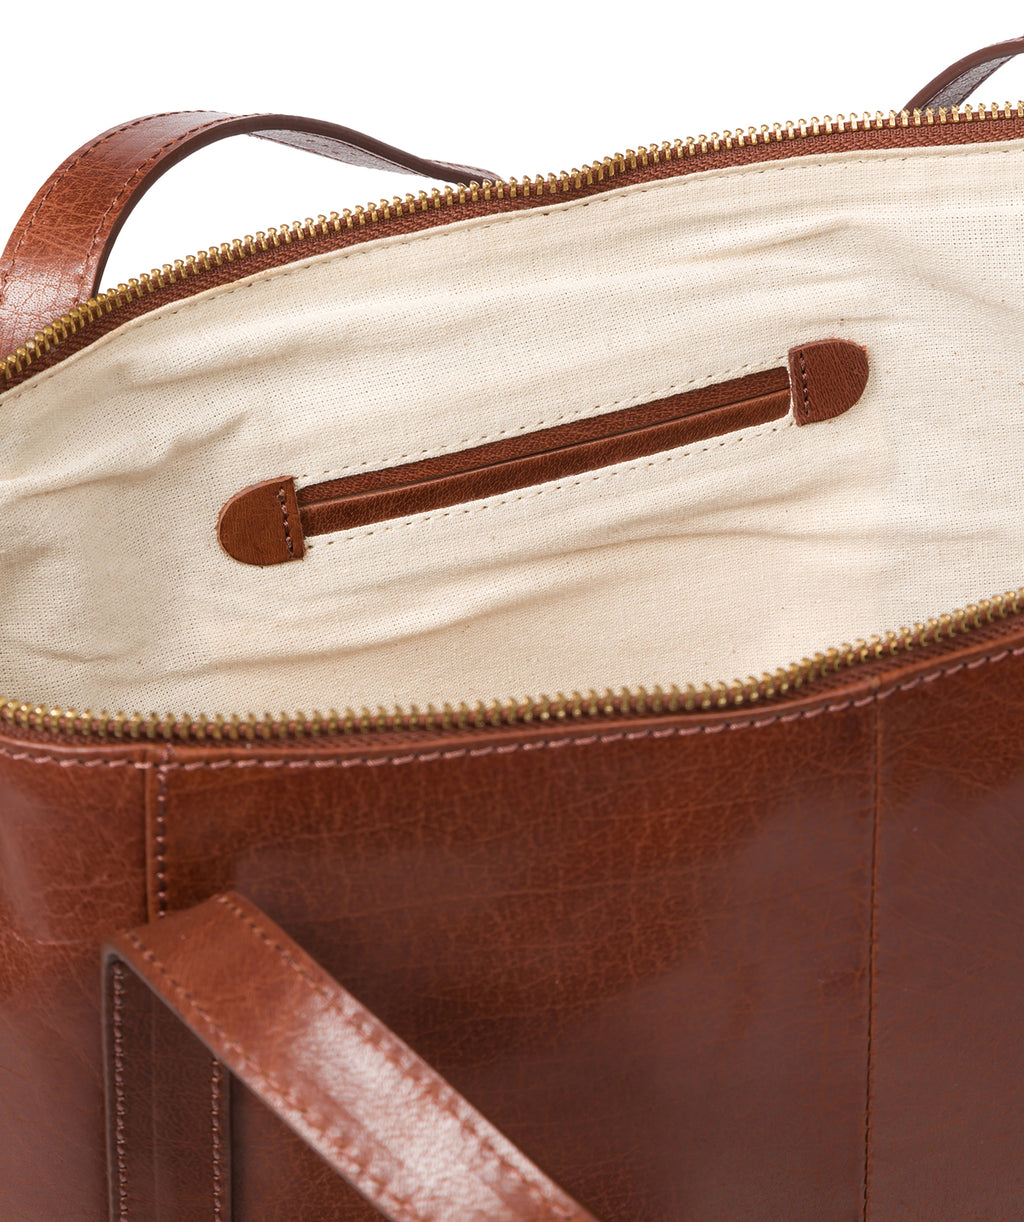 Brown Leather Tote Bag 'Mondo' by Conkca London – Pure Luxuries London